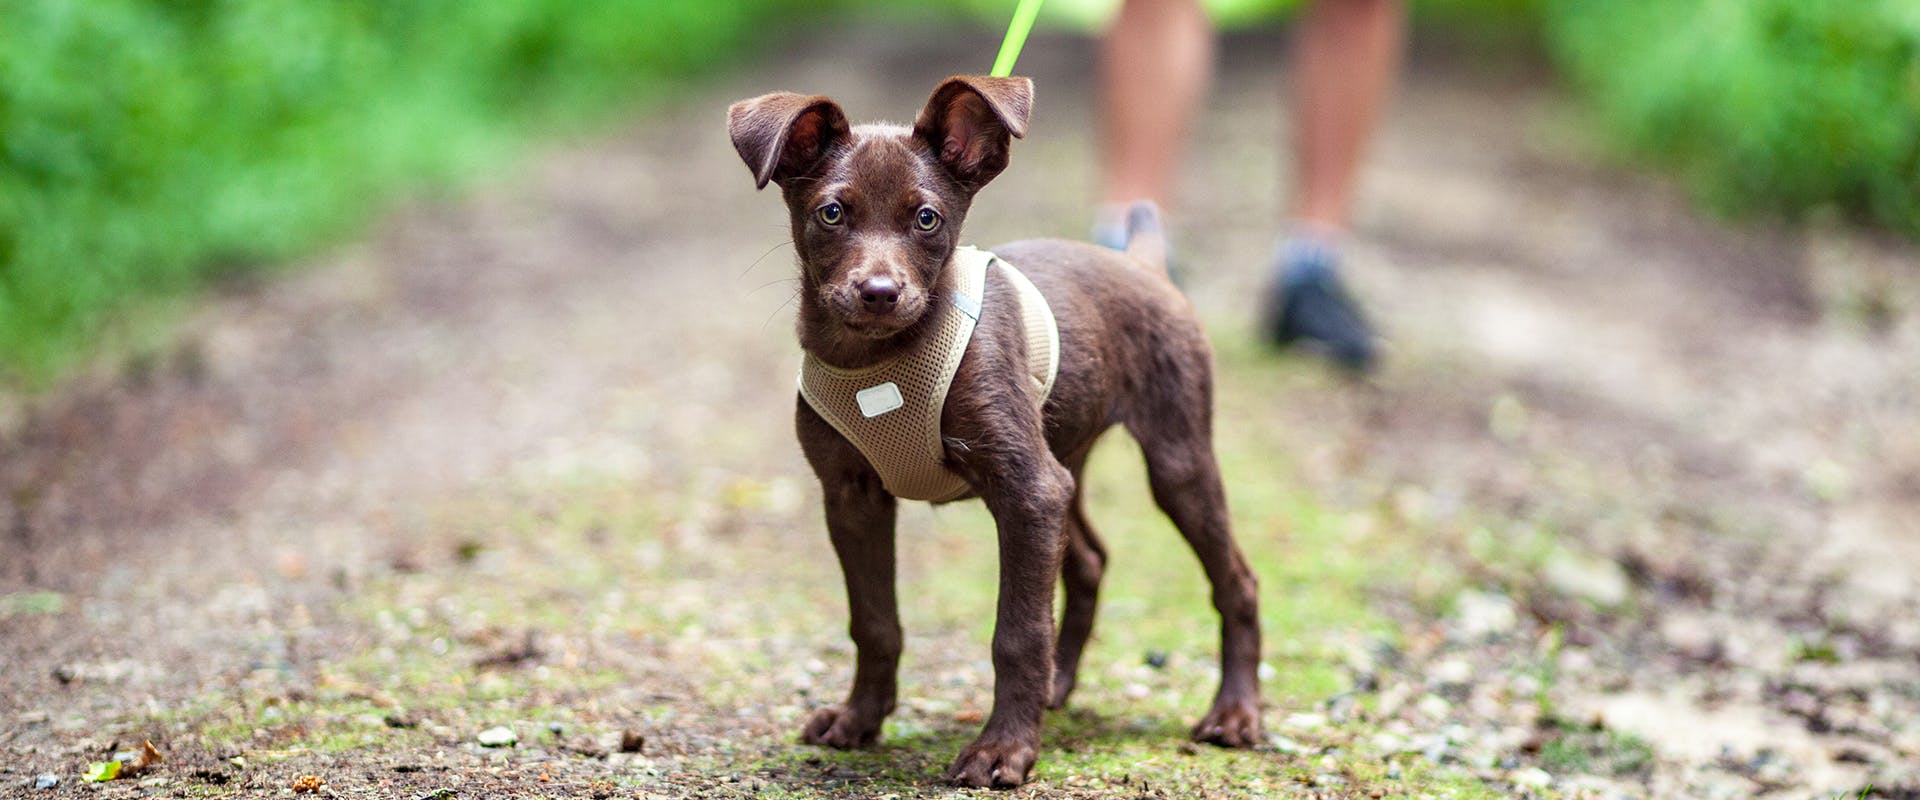 A tiny brown puppy walking through a forest, wearing a small dog harness